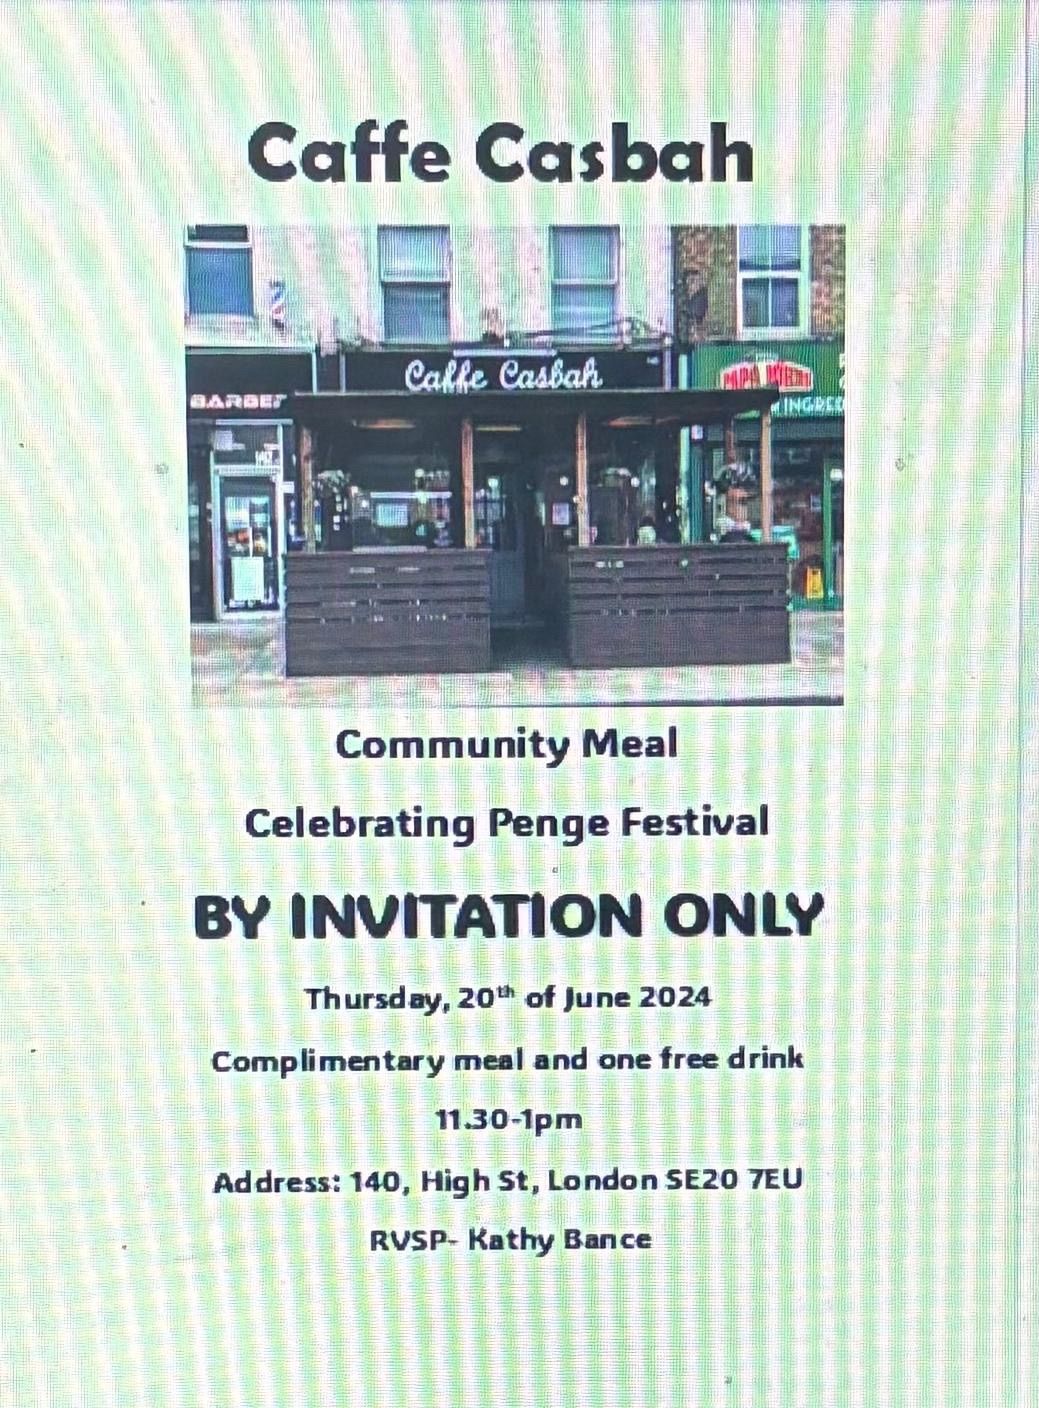 Community meal at Cafe Casbah 